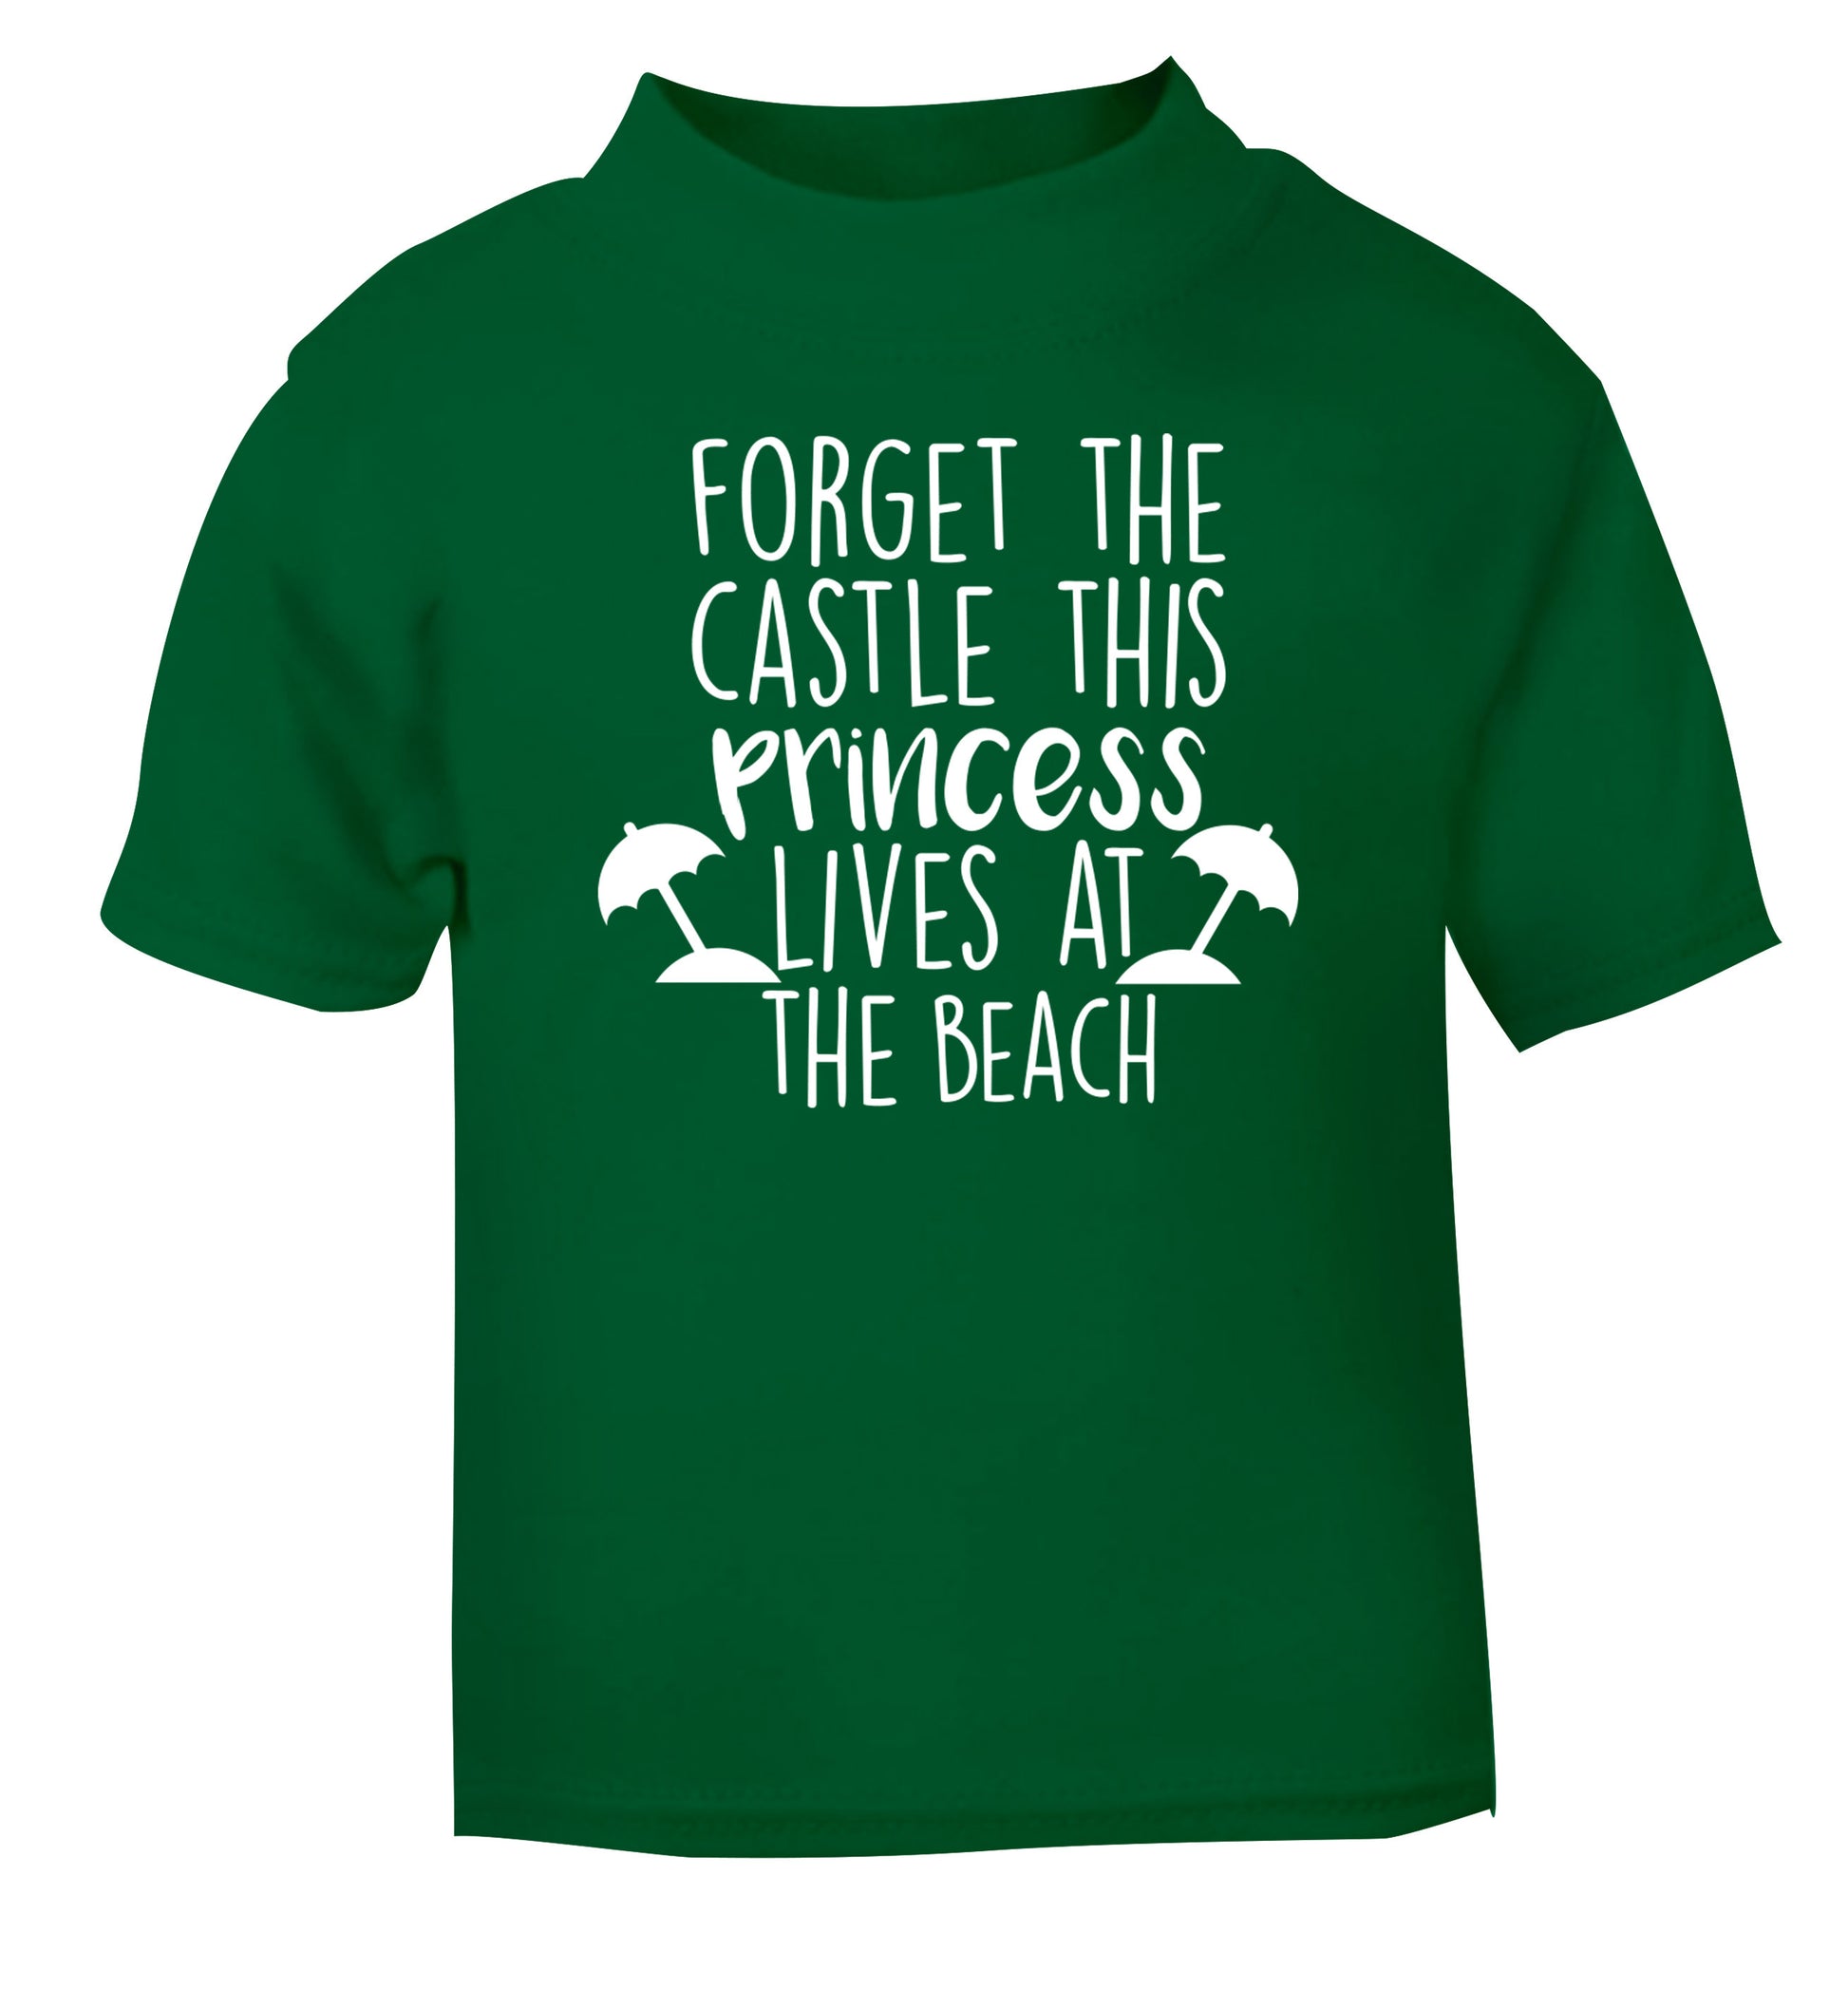 Forget the castle this princess lives at the beach green Baby Toddler Tshirt 2 Years